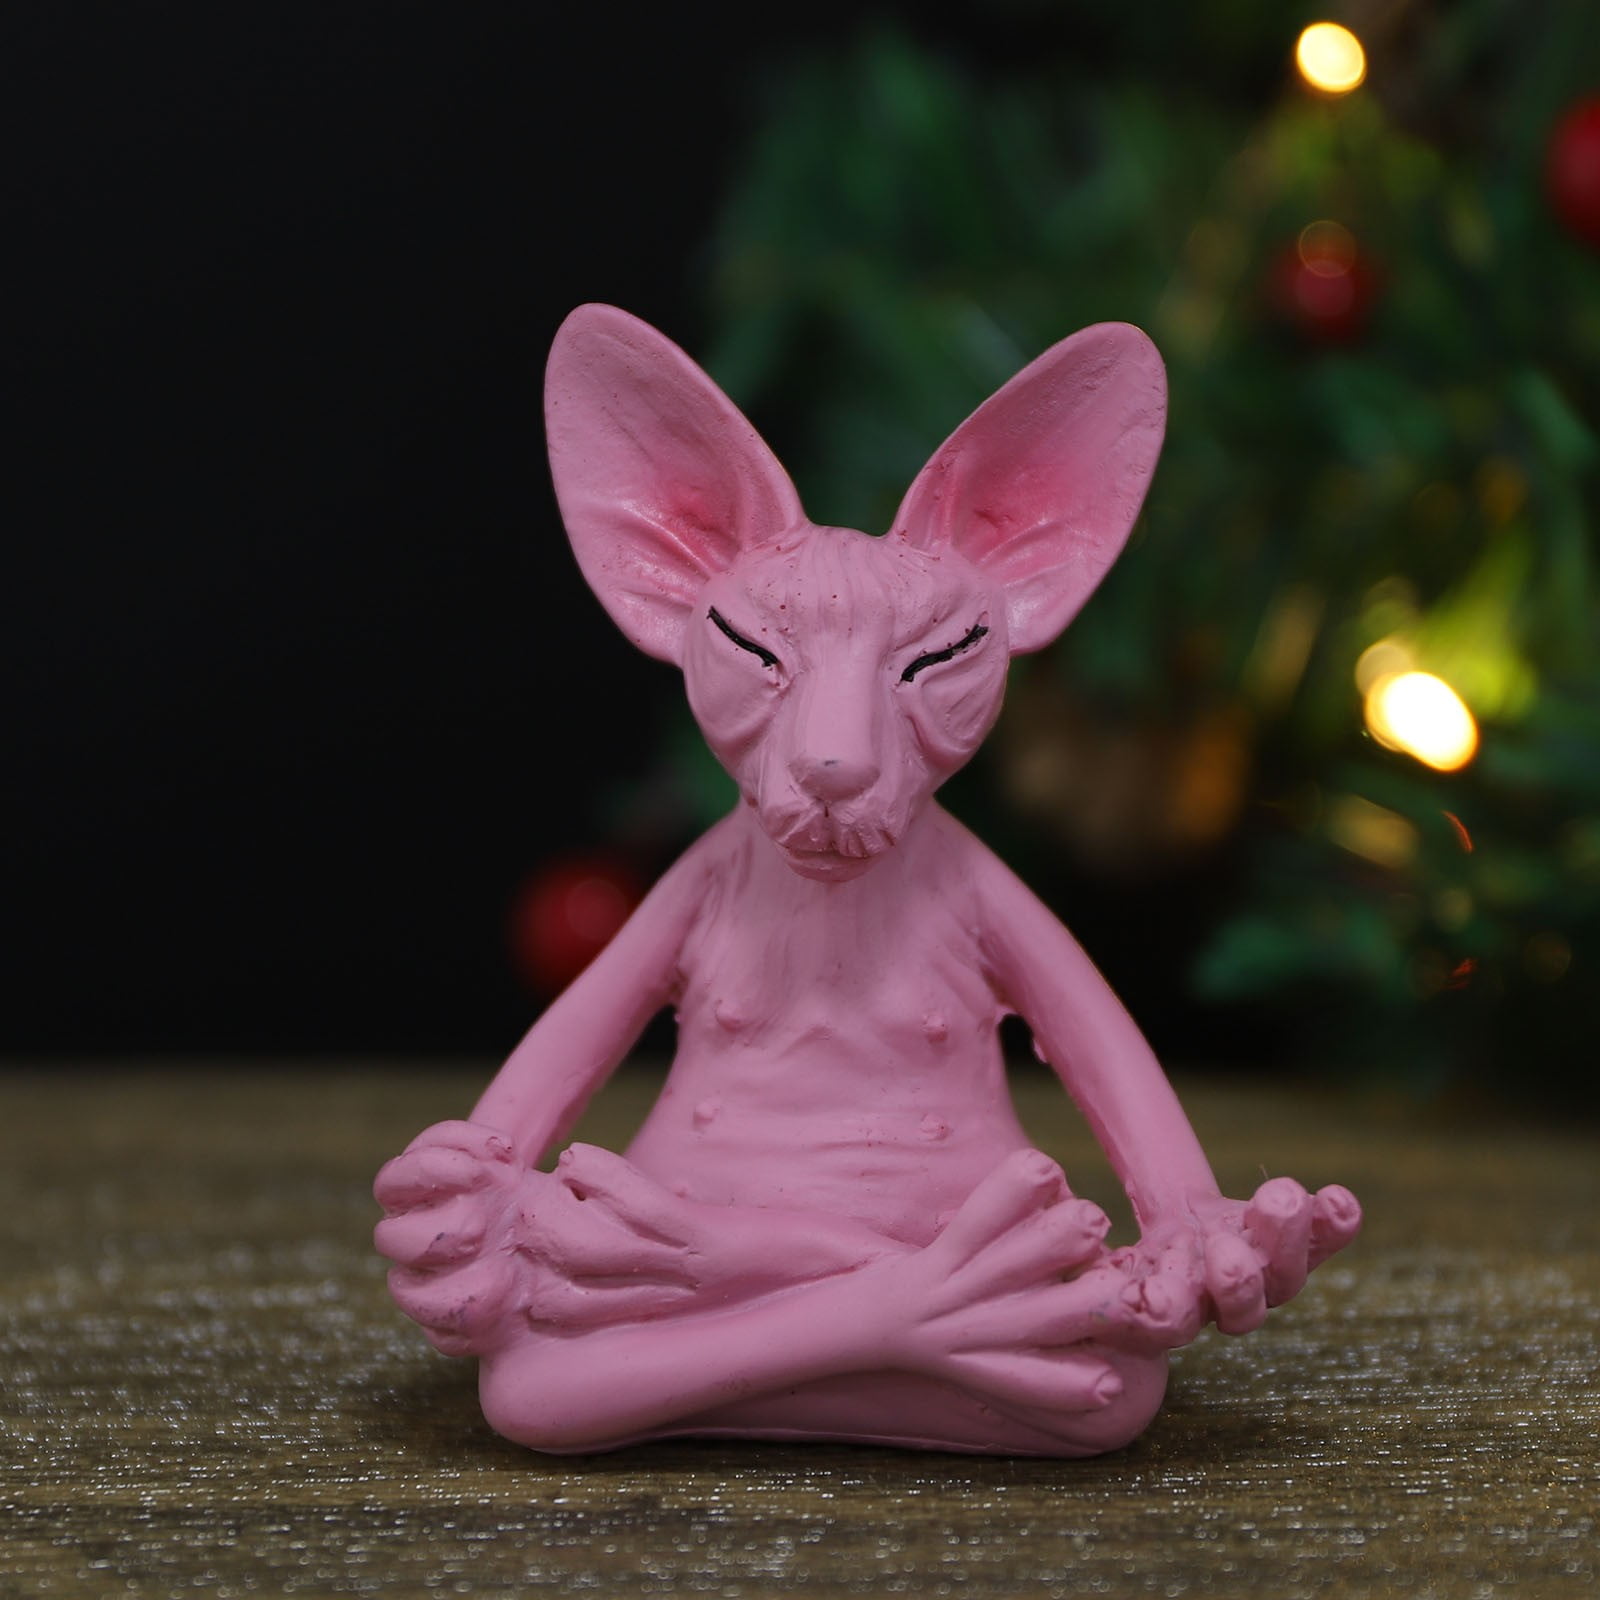 Meditating Thinking Cat Statue Sphynx Cat Meditation Statue Sphynx Hairless Cat for Home Office Decor Collectible Figurines Miniature Decor A 